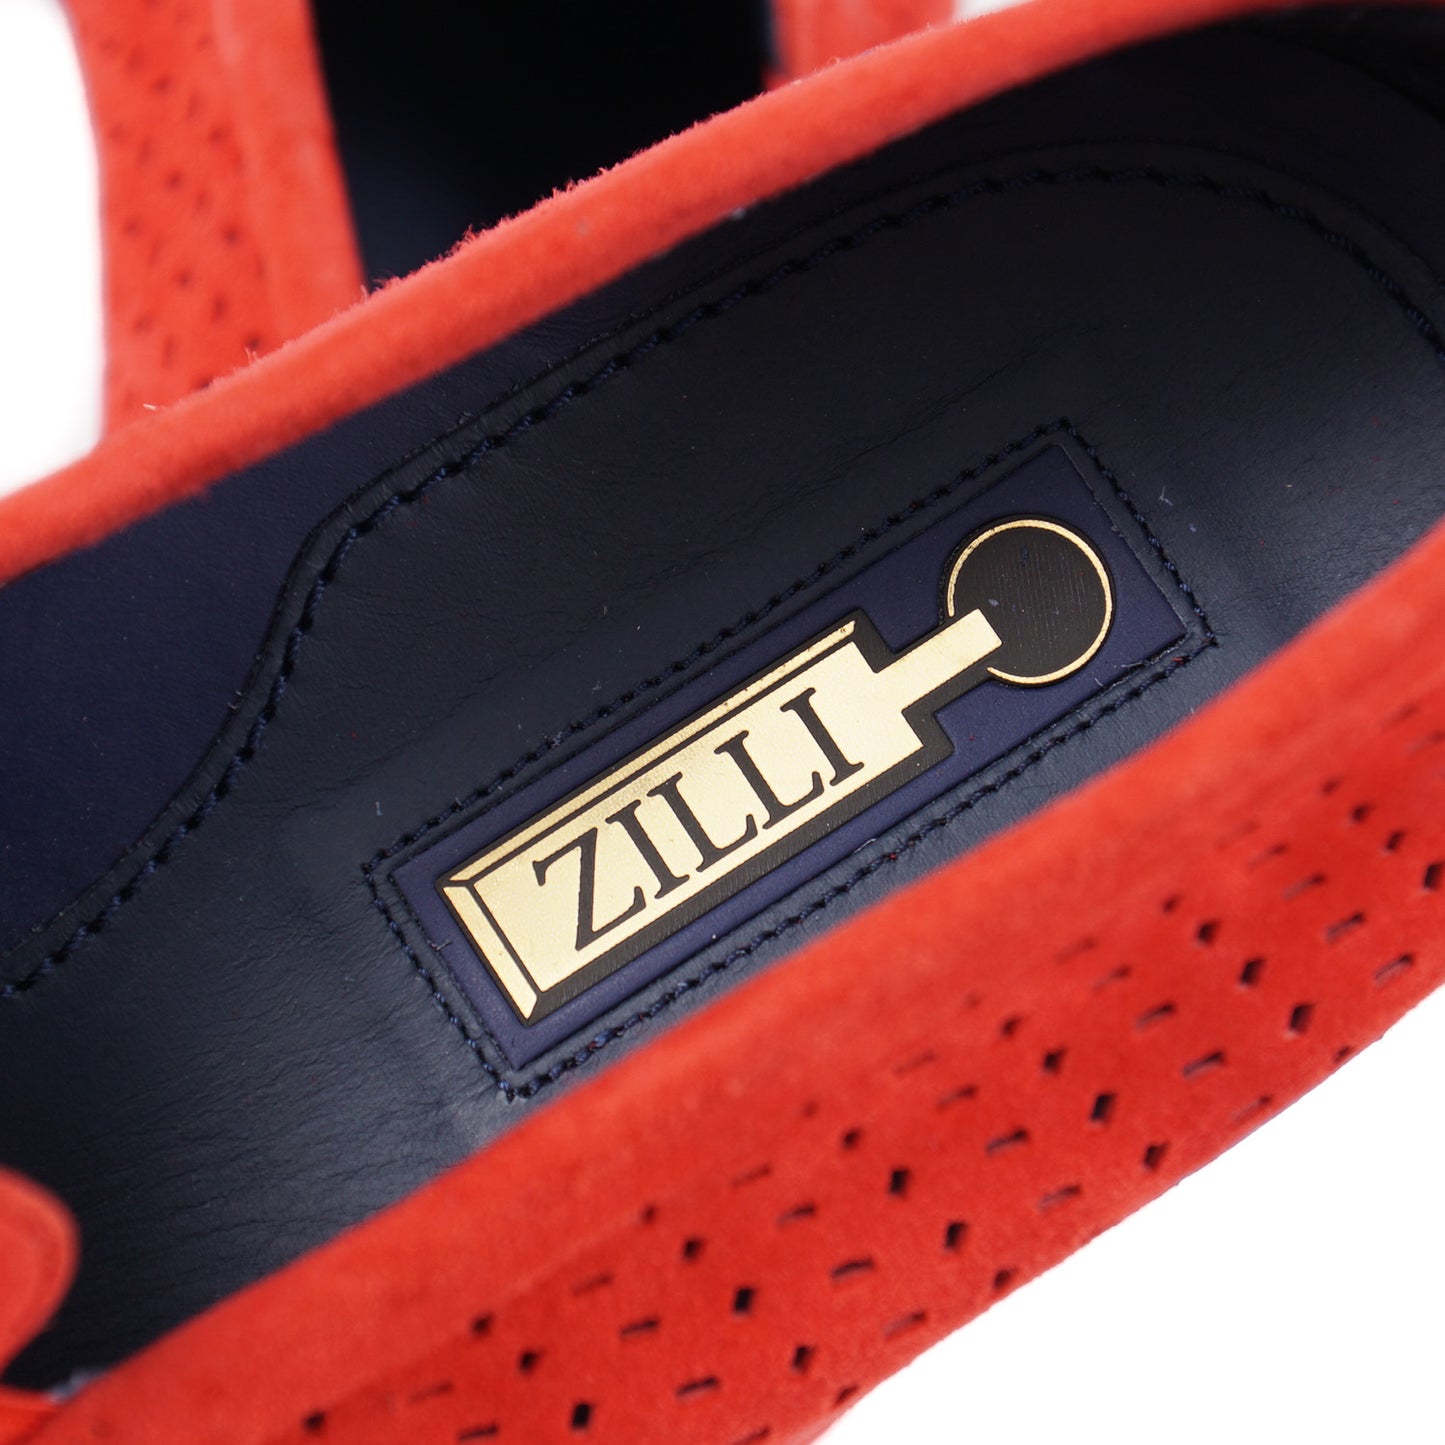 Zilli Perforated Suede Sport Loafers - Top Shelf Apparel